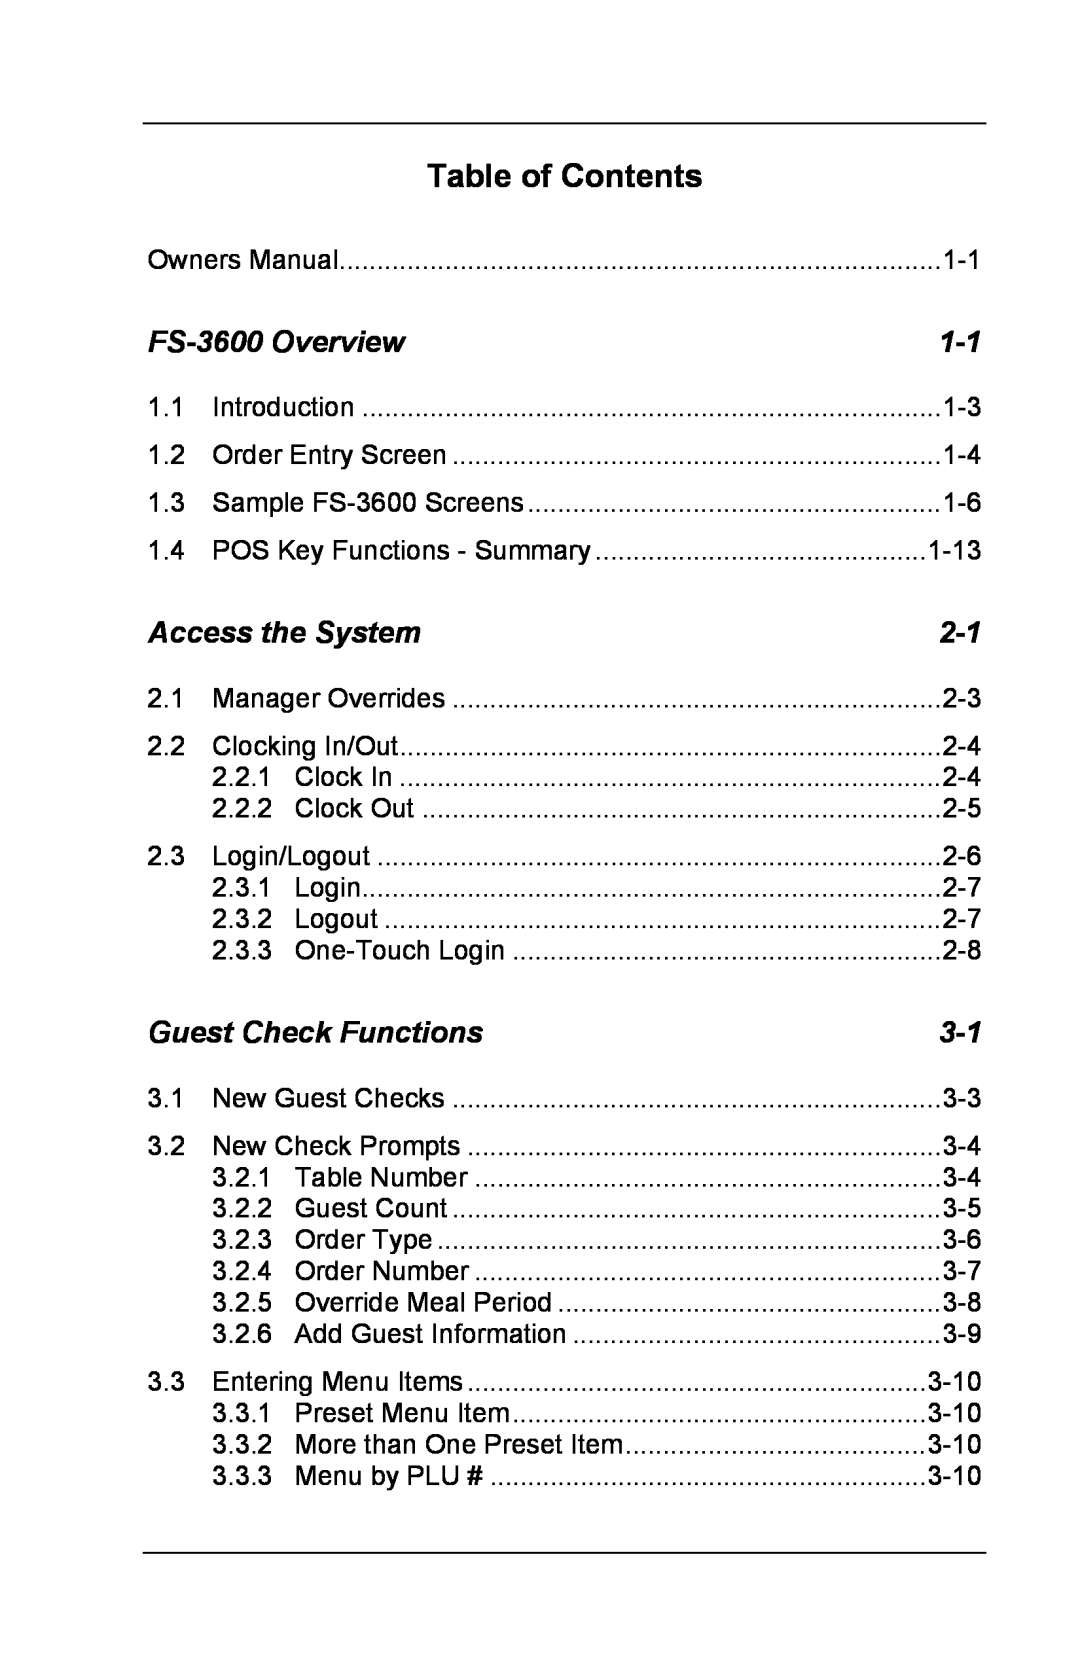 Toshiba owner manual Table of Contents, FS-3600Overview, Access the System, Guest Check Functions 